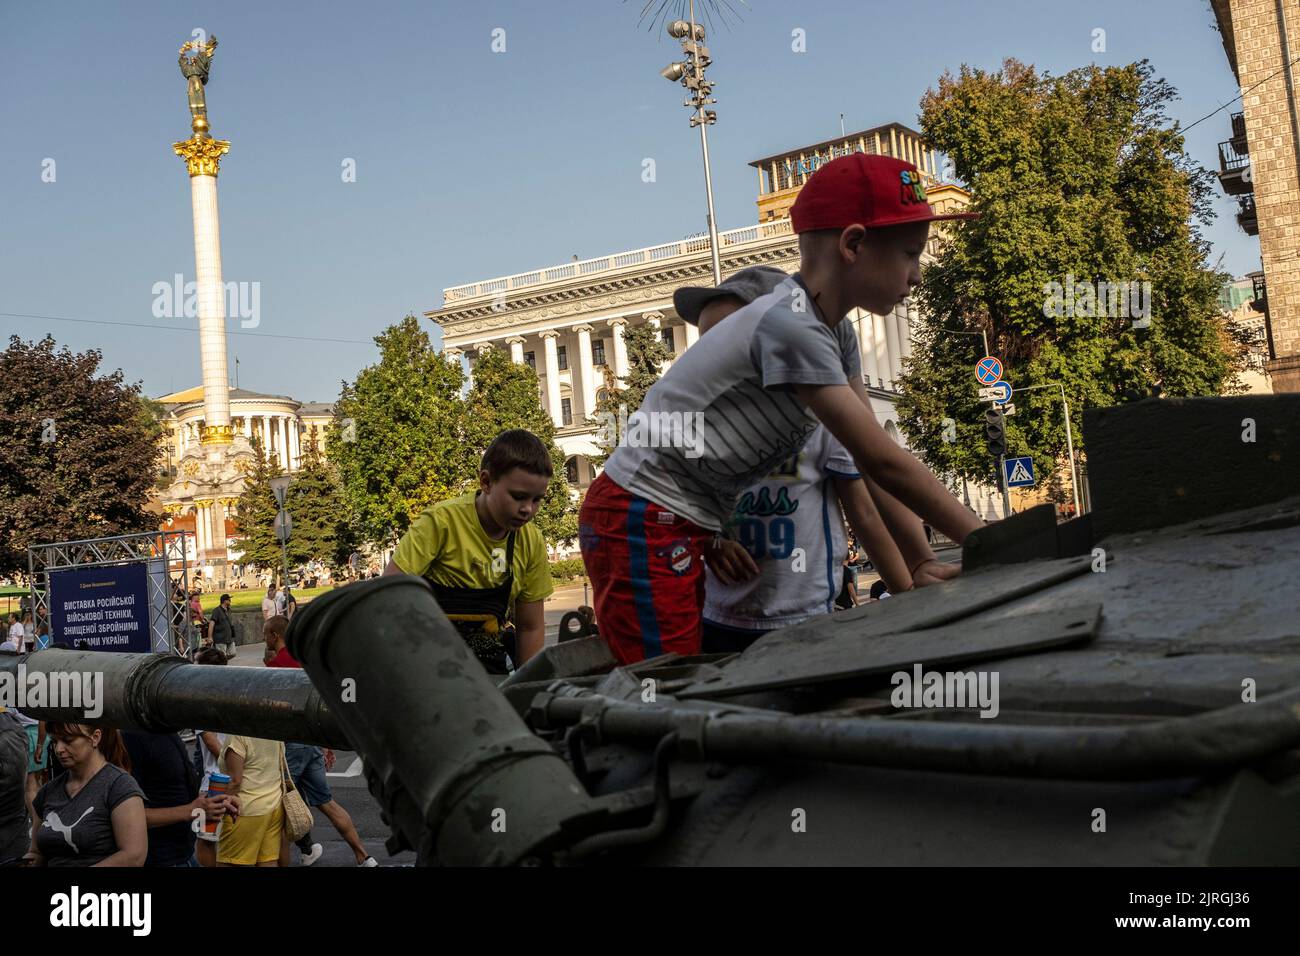 Kyiv, Kyiv Oblast, Ukraine. 21st Aug, 2022. Children climb the display of a destroyed Russian tank on the streets of Kyiv. As dedicated to the upcoming Independence Day of Ukraine, and nearly 6 months after the full-scale invasion of Ukraine on February 24, the country's capital Kyiv holds an exhibition on the main street of Khreschaytk Street showing multiple destroyed military equipment, tanks and weapons from The Armed Forces of The Russian Federation (AFRF).As the Russian full invasion of Ukraine started on February 24, the war that has killed numerous civilians and soldiers, nearly 900 Stock Photo